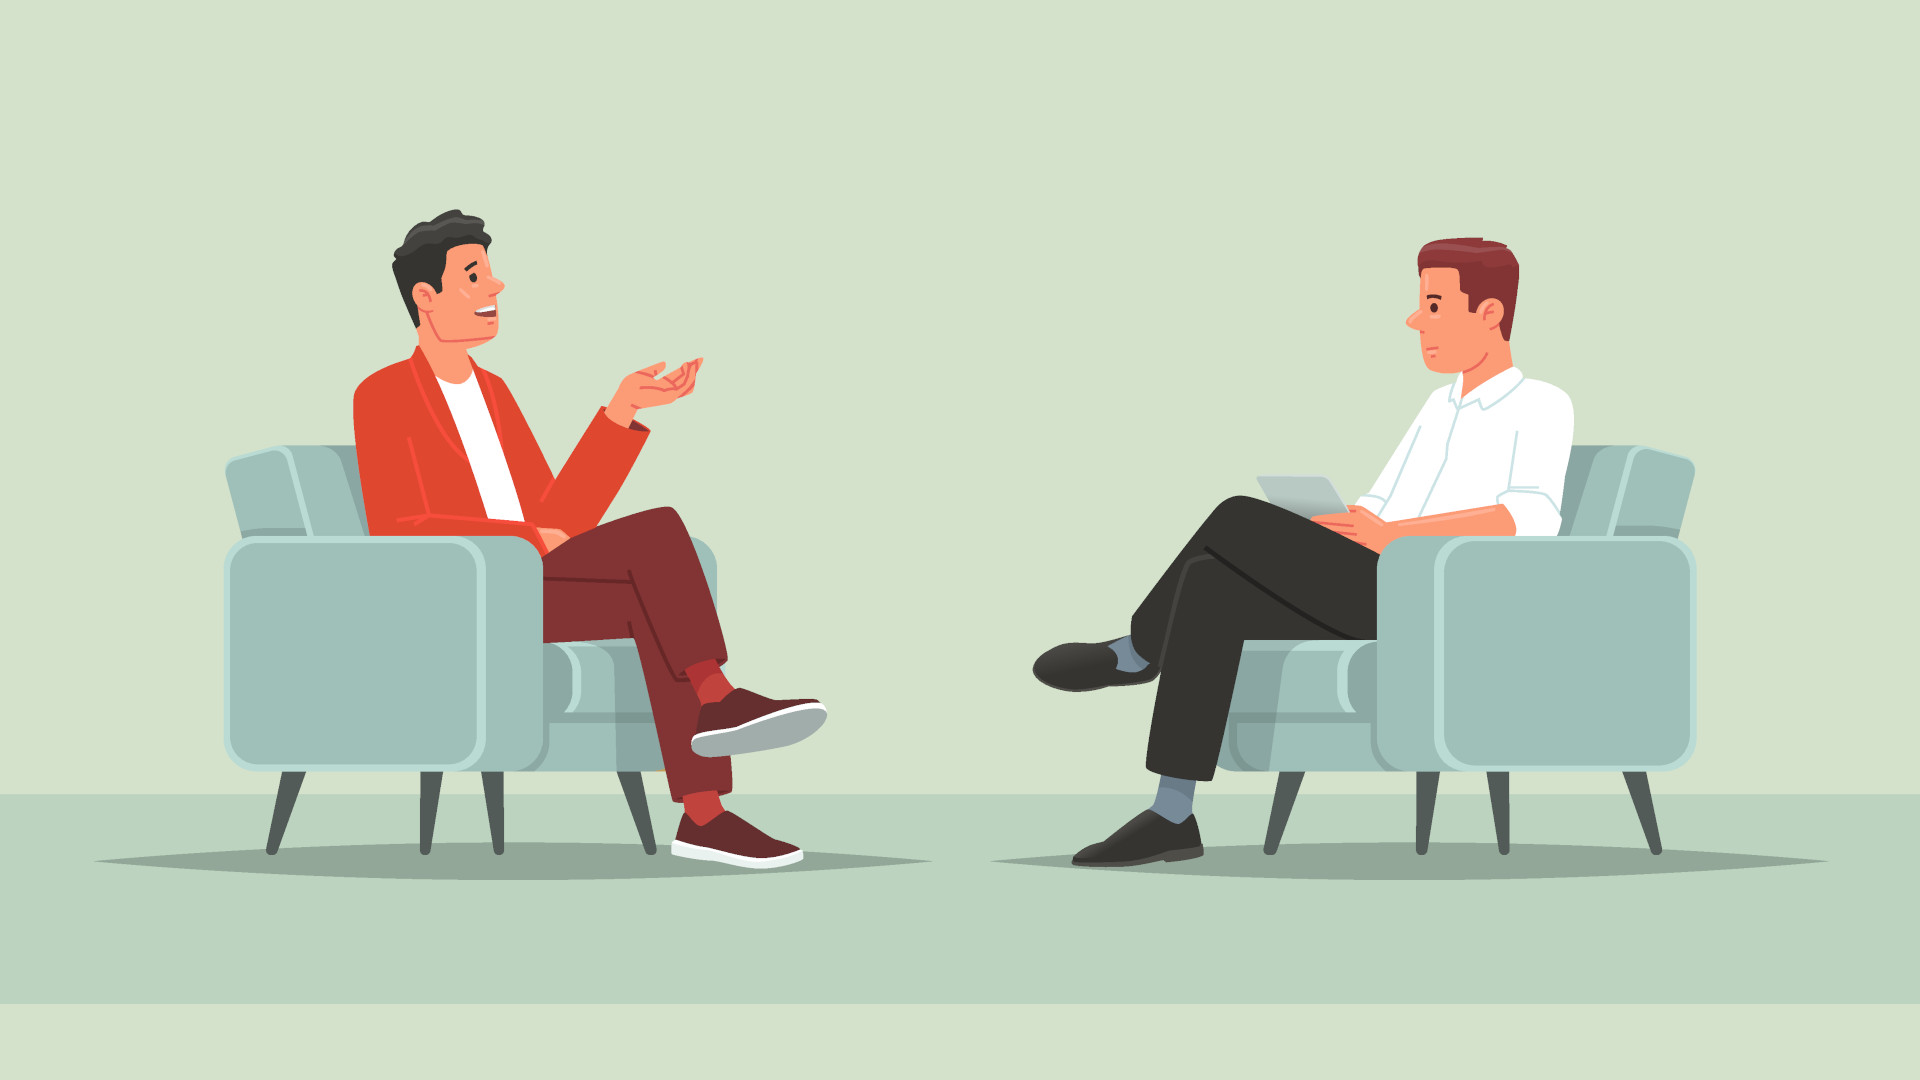 An illustration of two people on chairs having a business meeting